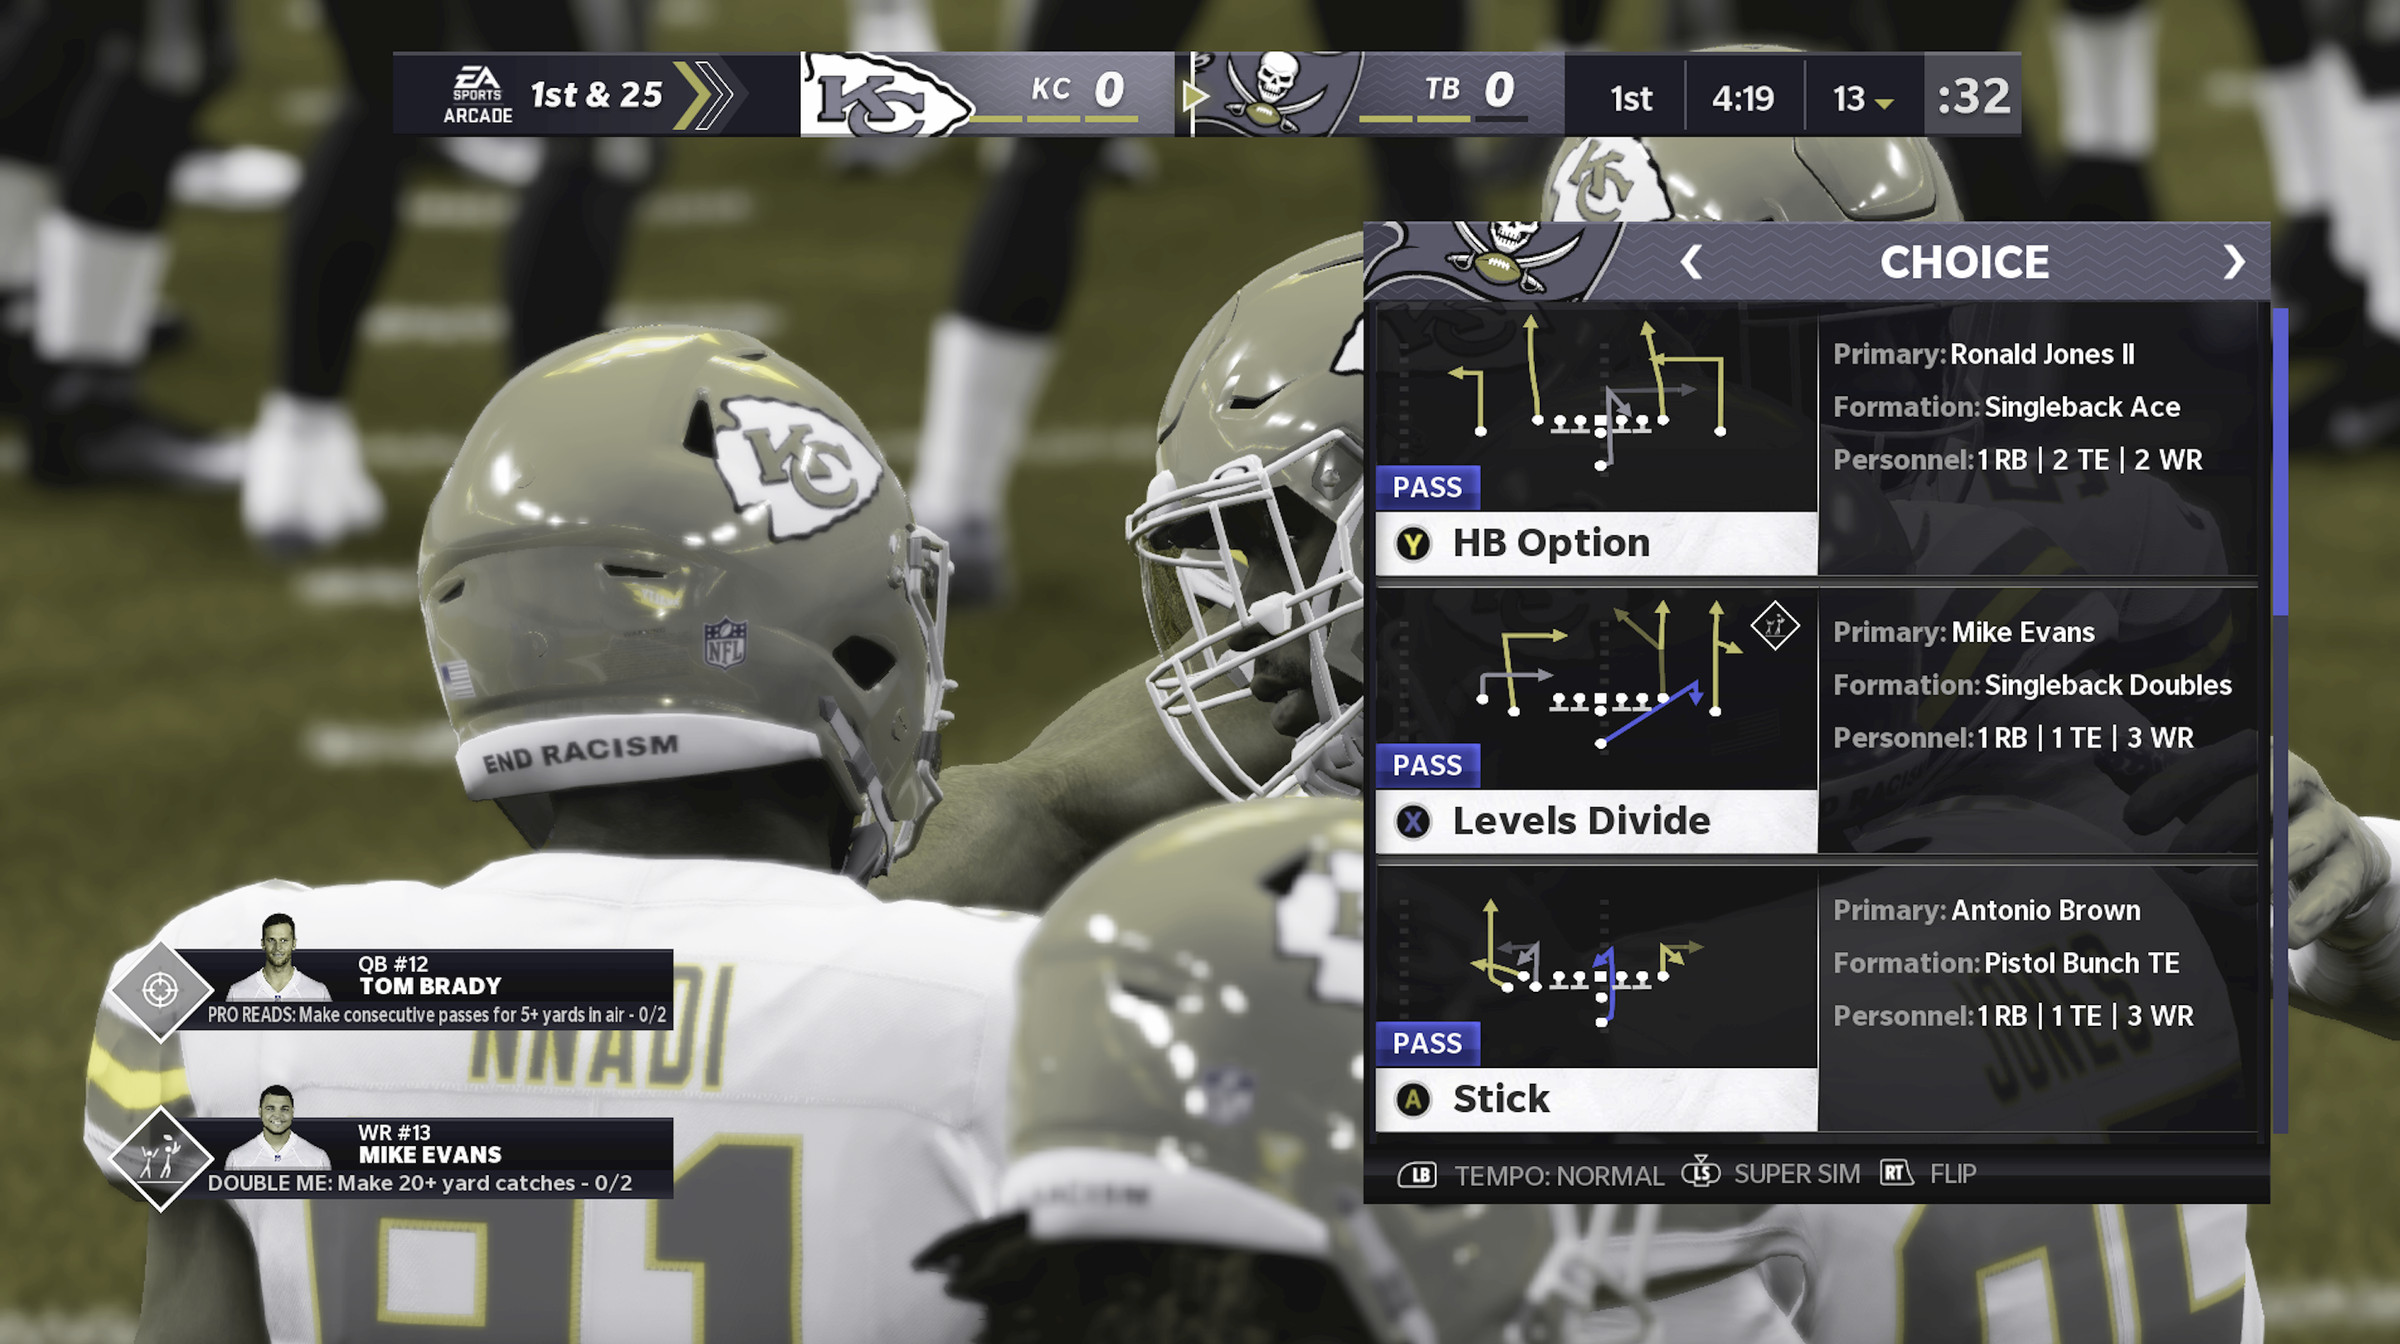 Screenshot from Madden 21, showing different options of plays, with color contrast adjusted for color blindness.